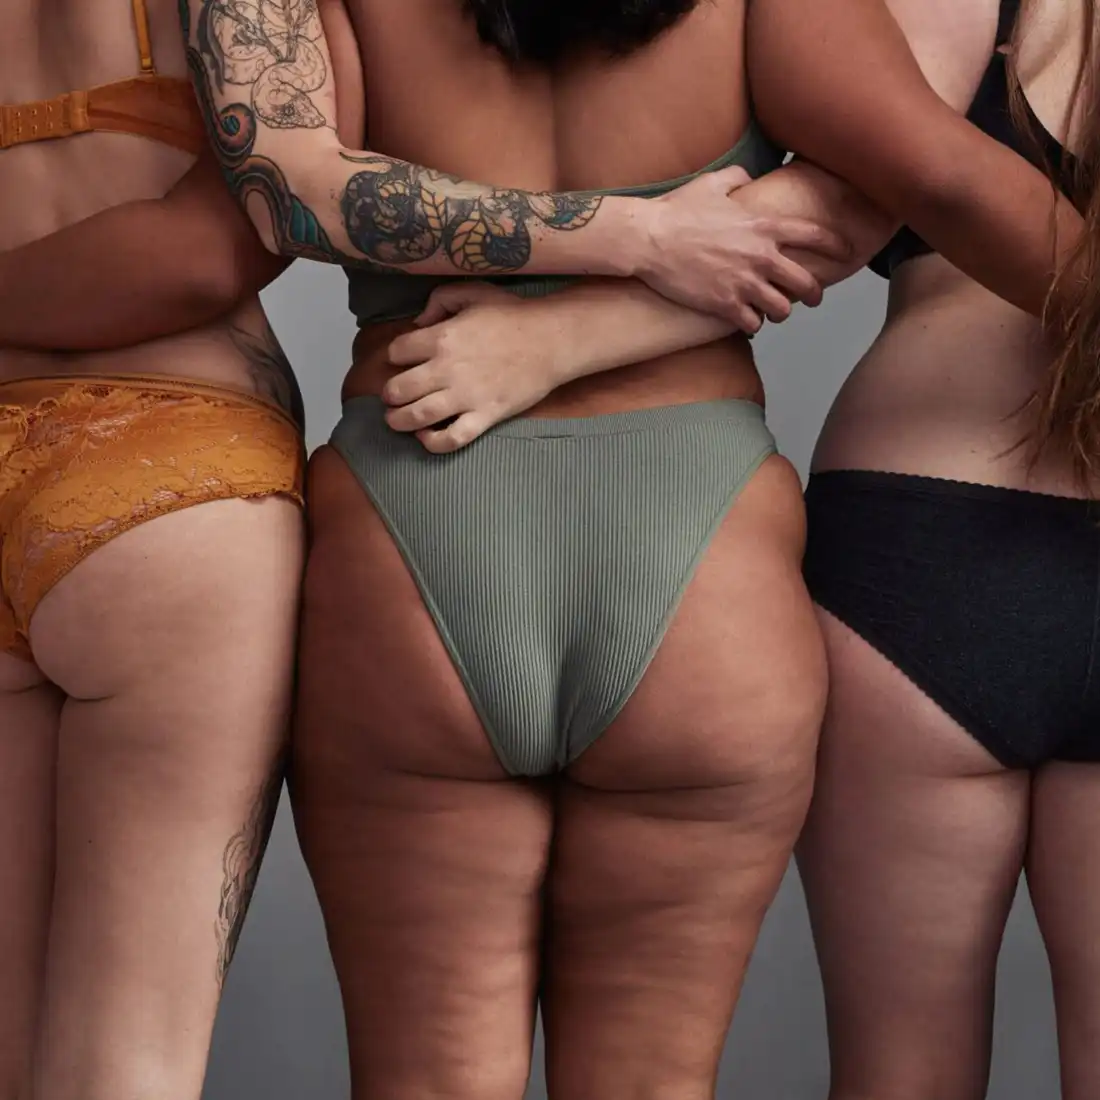 back view of women with arms around each others waist